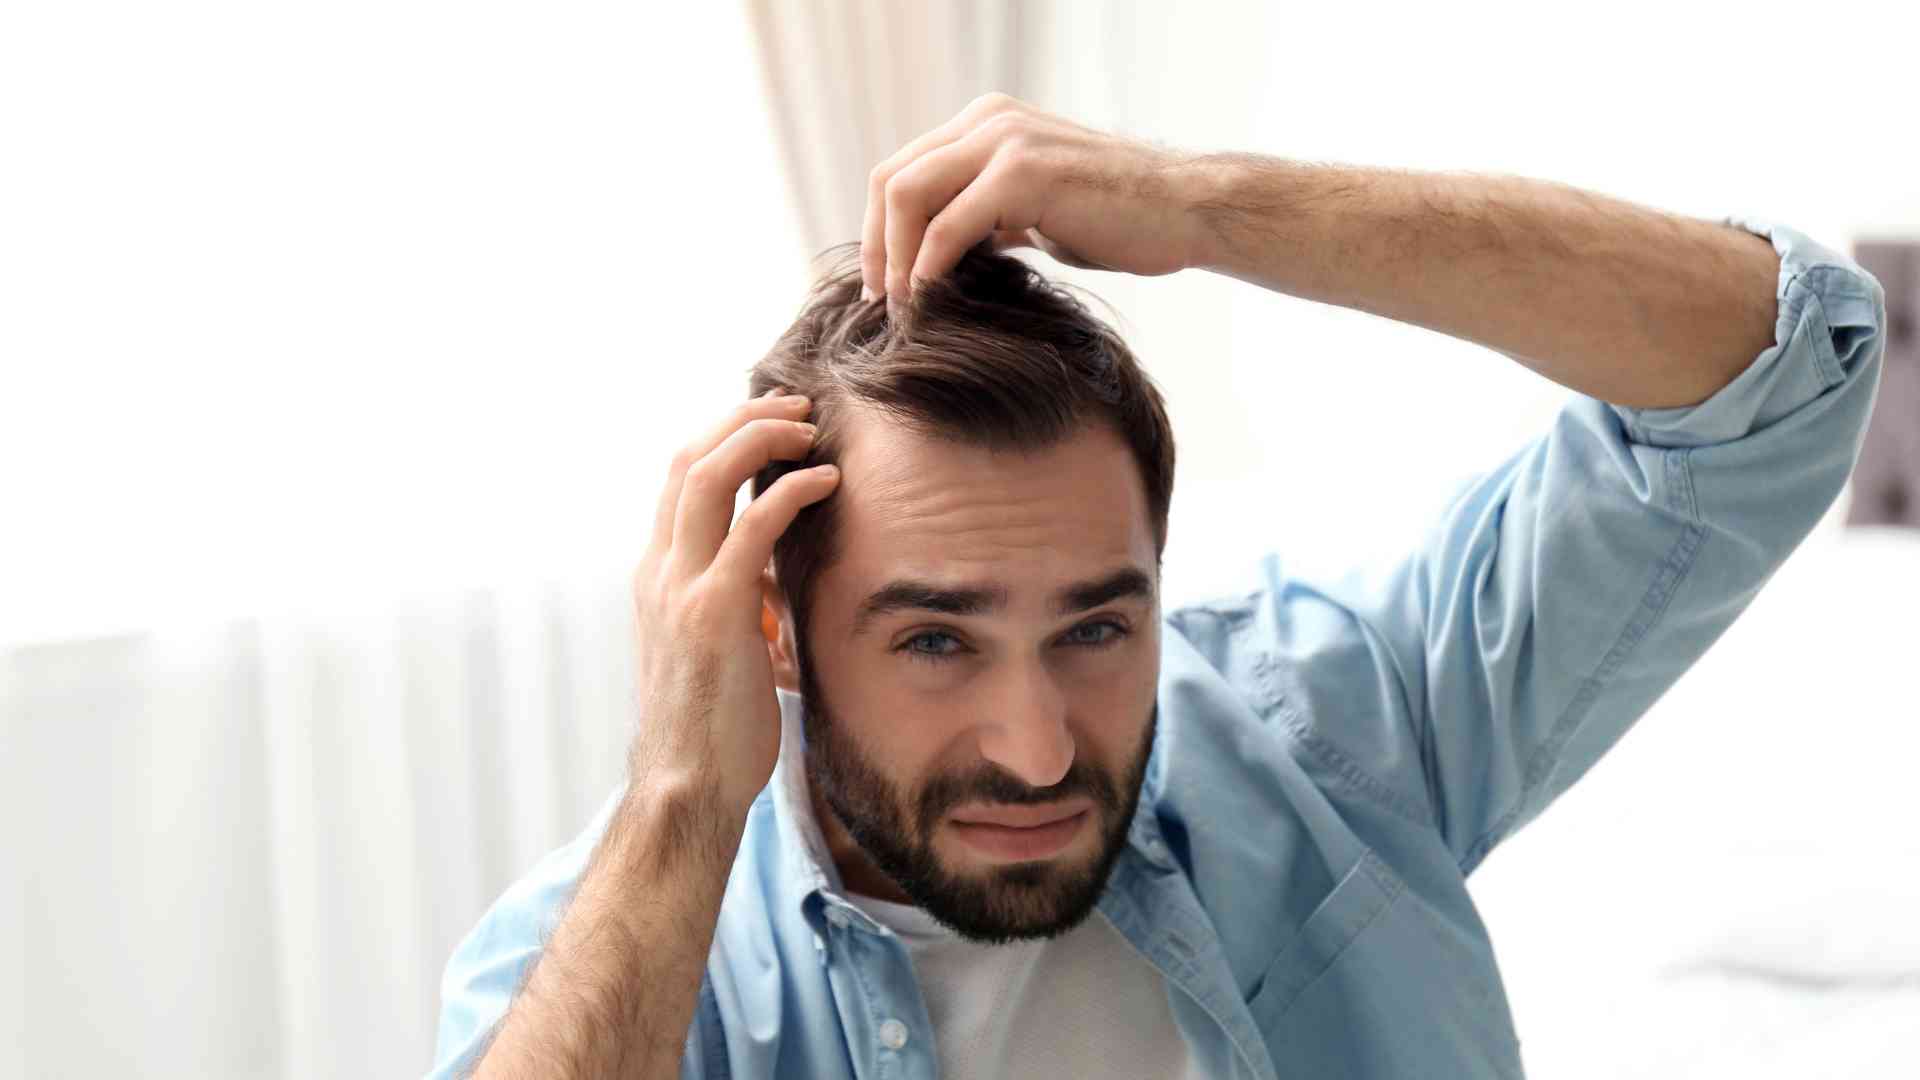 What are some overlooked environmental factors that contribute to hair loss